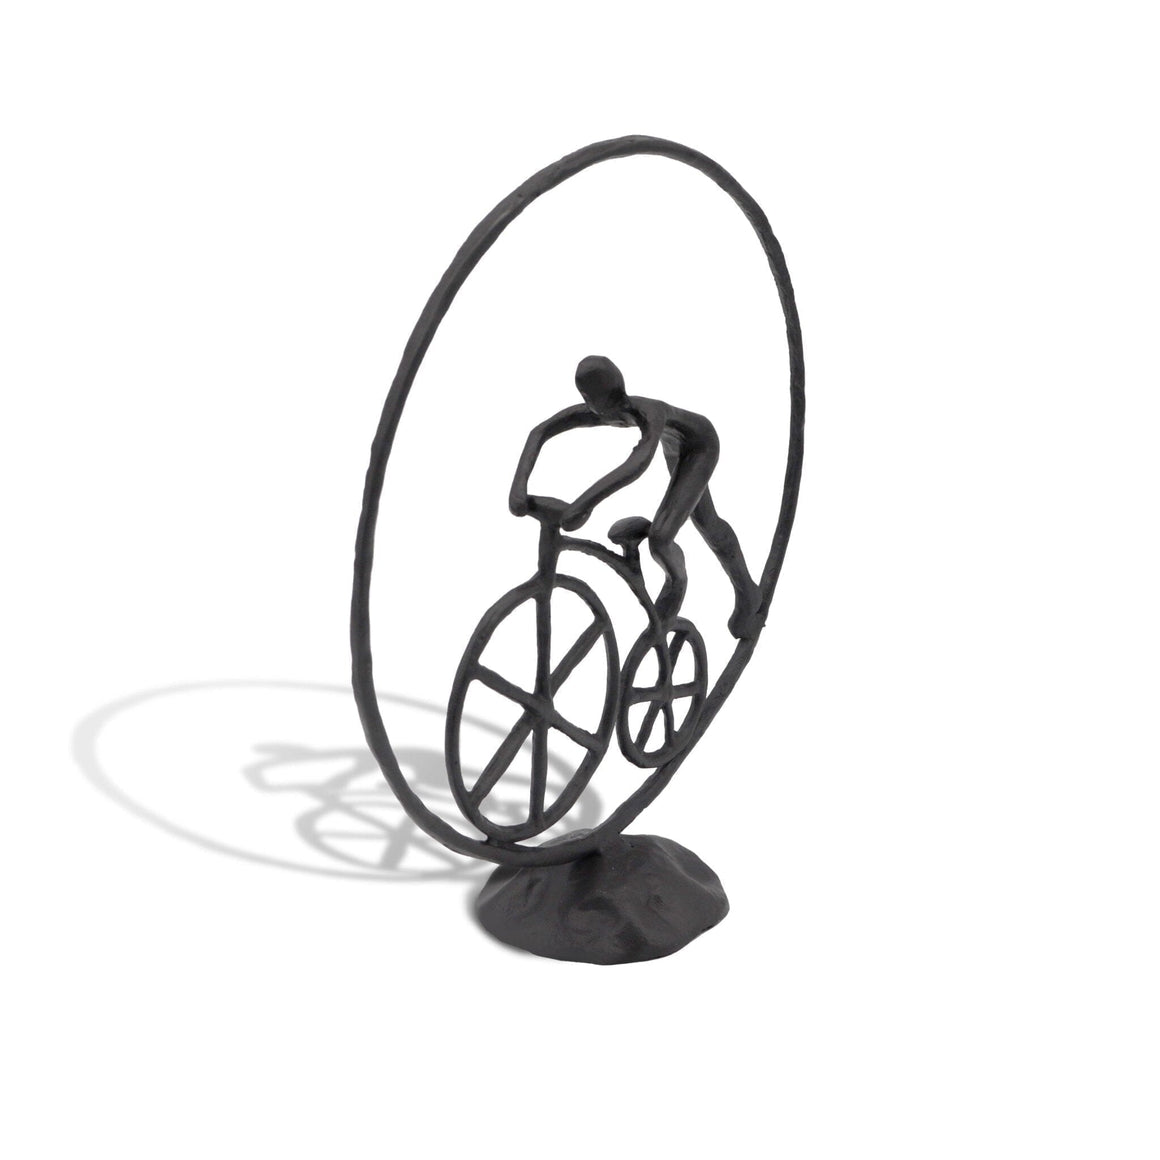 Man in Circle Bicycle Sculpture - Metal Figurine - Cast Iron - Abstract Art - Rustic Deco Incorporated